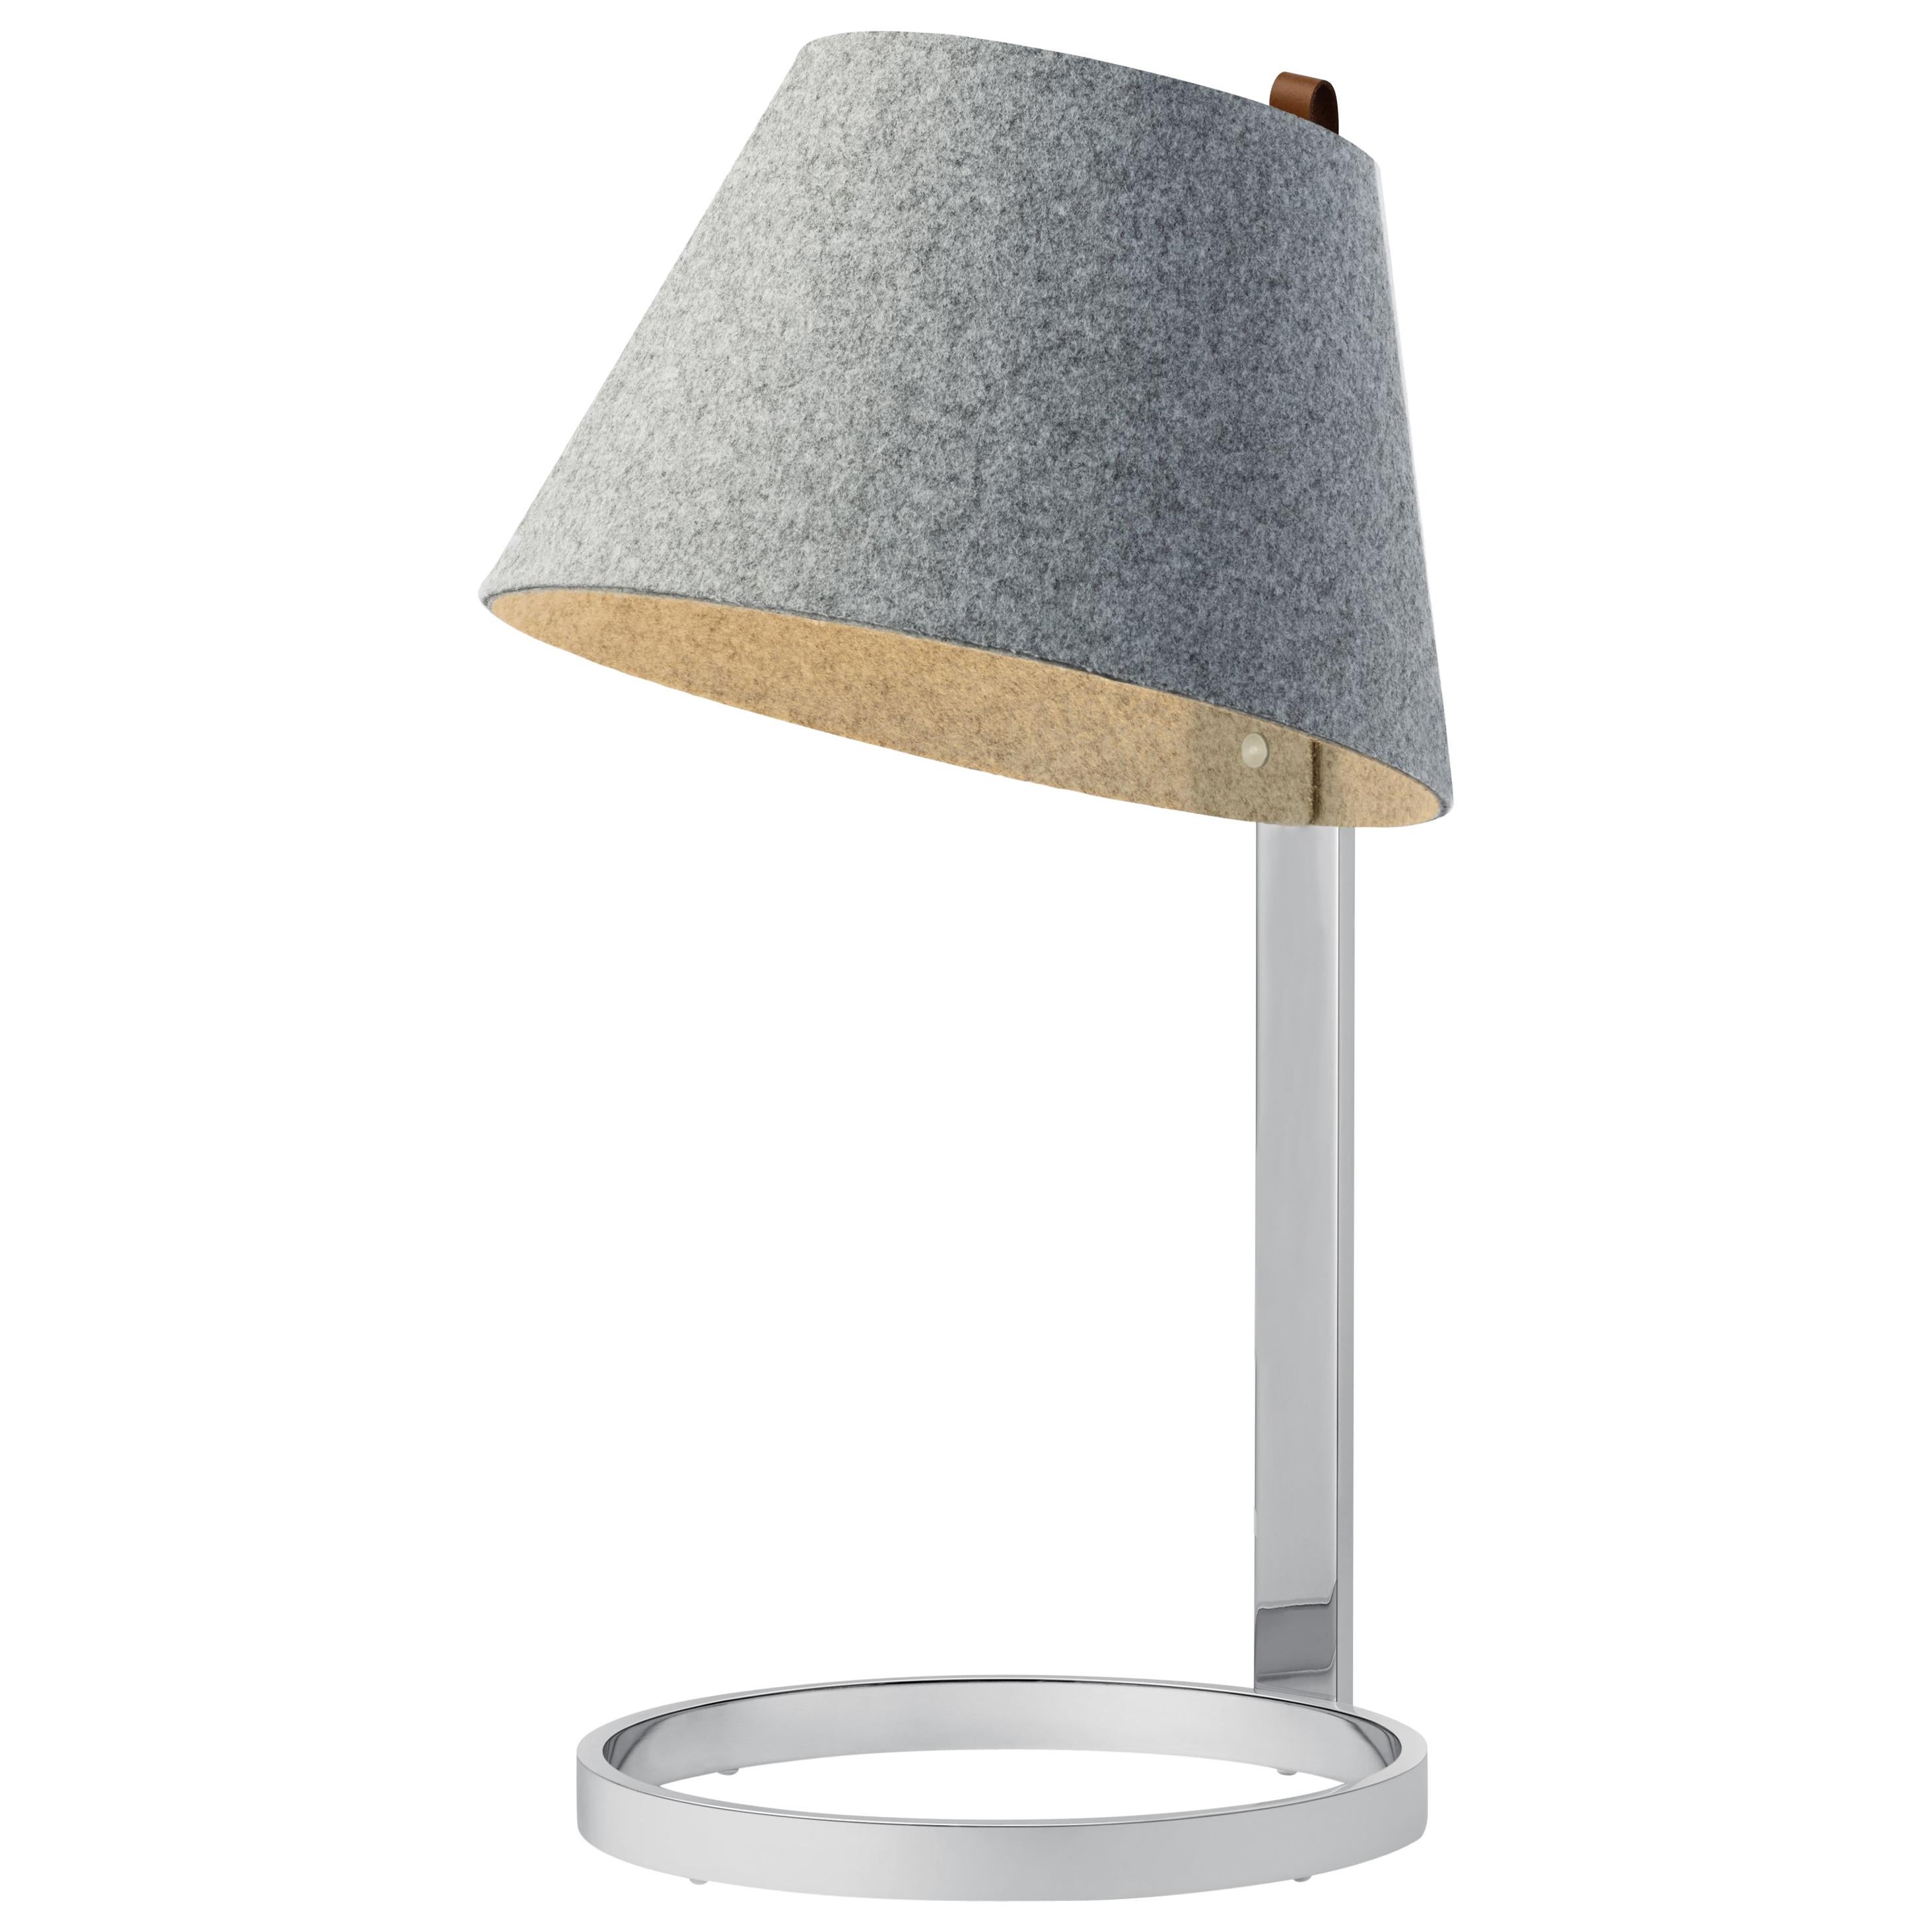 Lana Small Table Lamp in Stone and Grey with Chrome Base by Pablo Designs